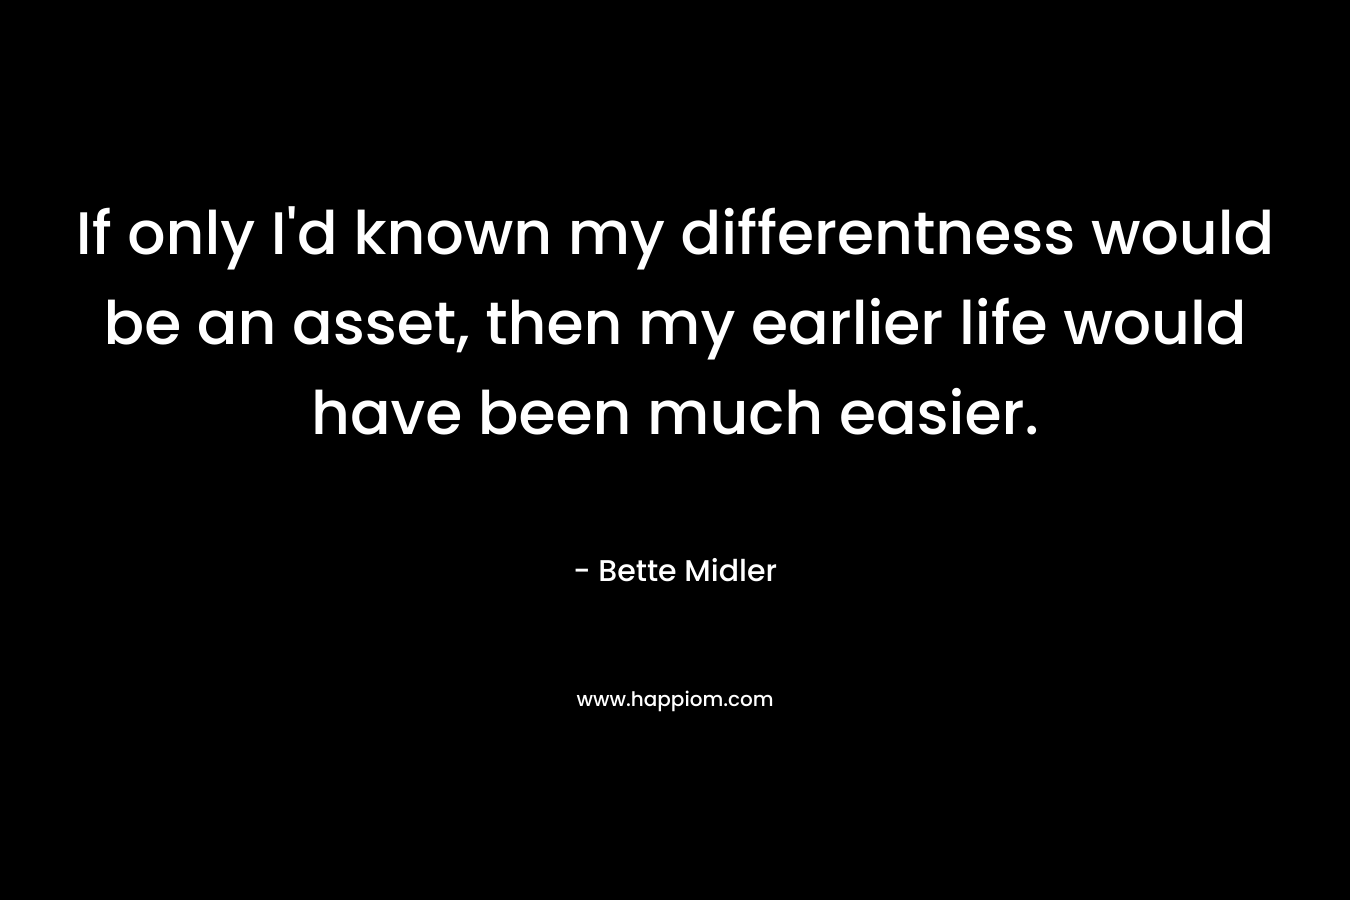 If only I’d known my differentness would be an asset, then my earlier life would have been much easier. – Bette Midler